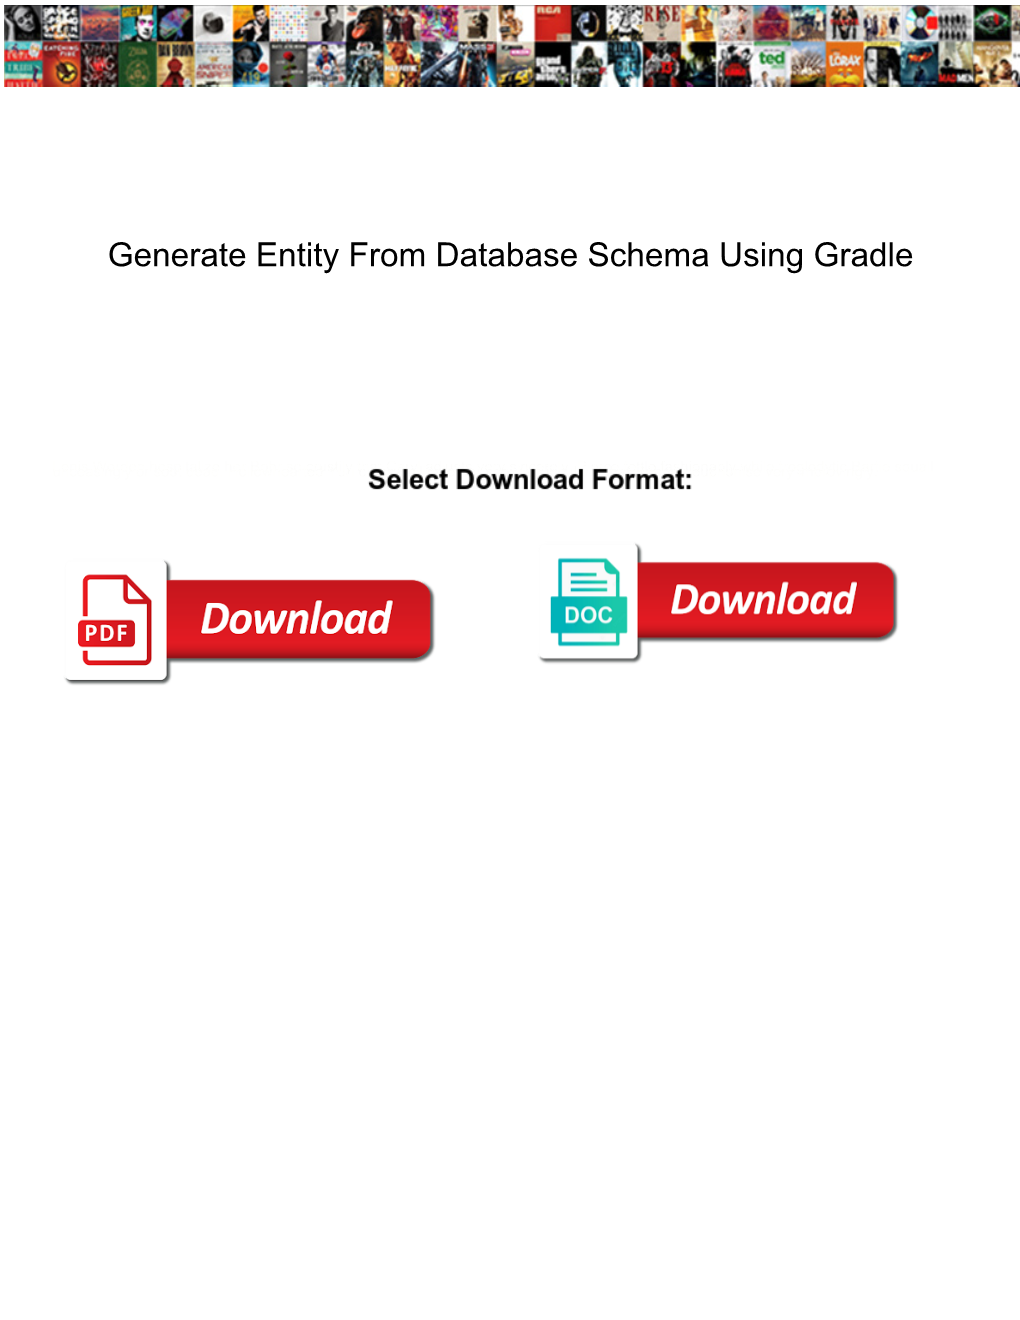 Generate Entity from Database Schema Using Gradle